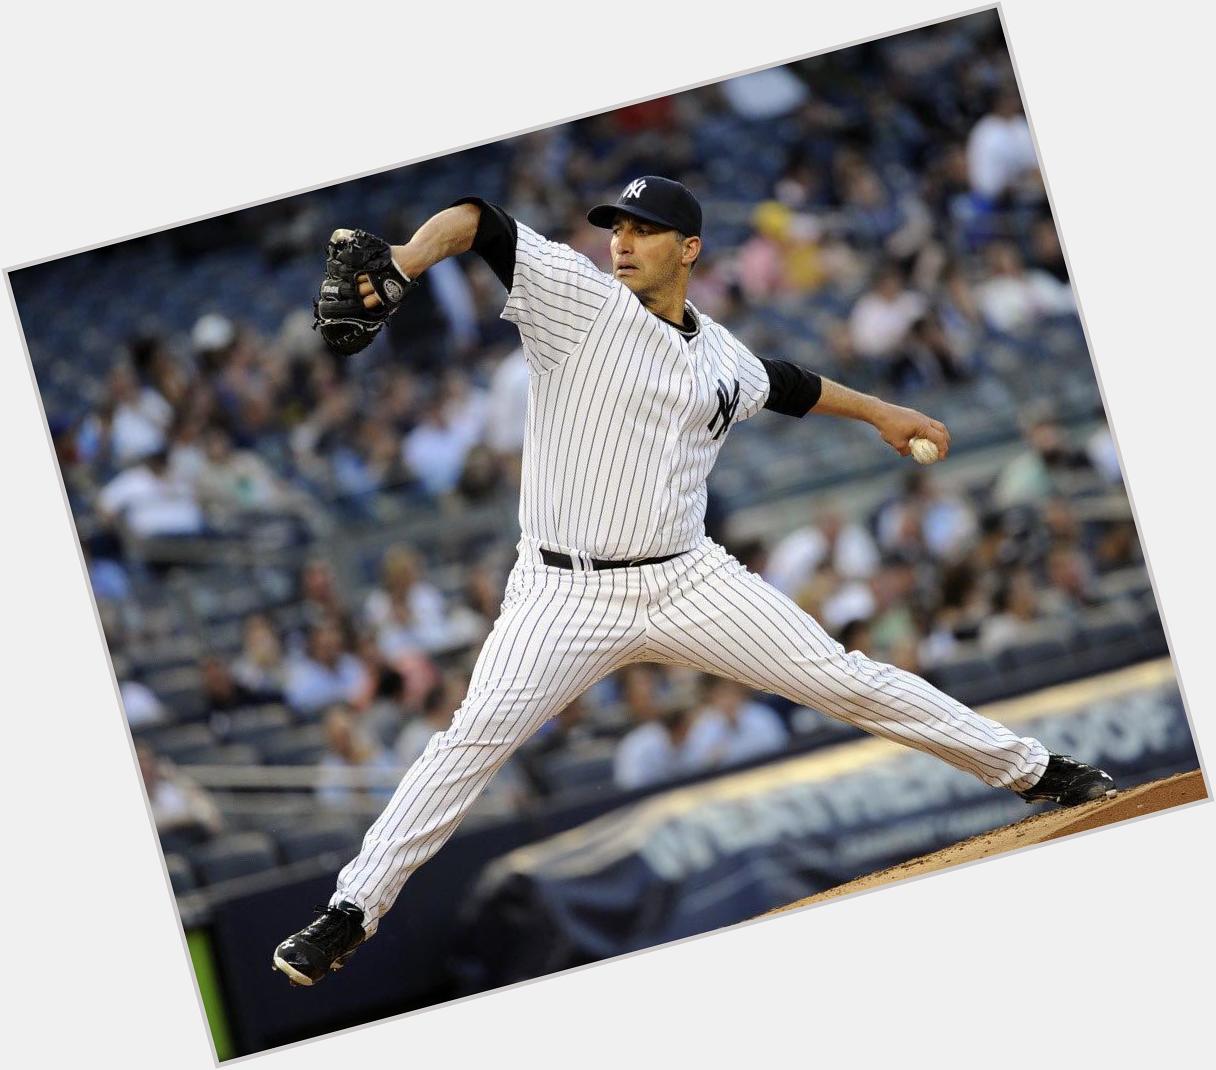 Happy birthday to one of the best left handed pitchers ever and the man who made me want to pitch, Andy Pettitte 